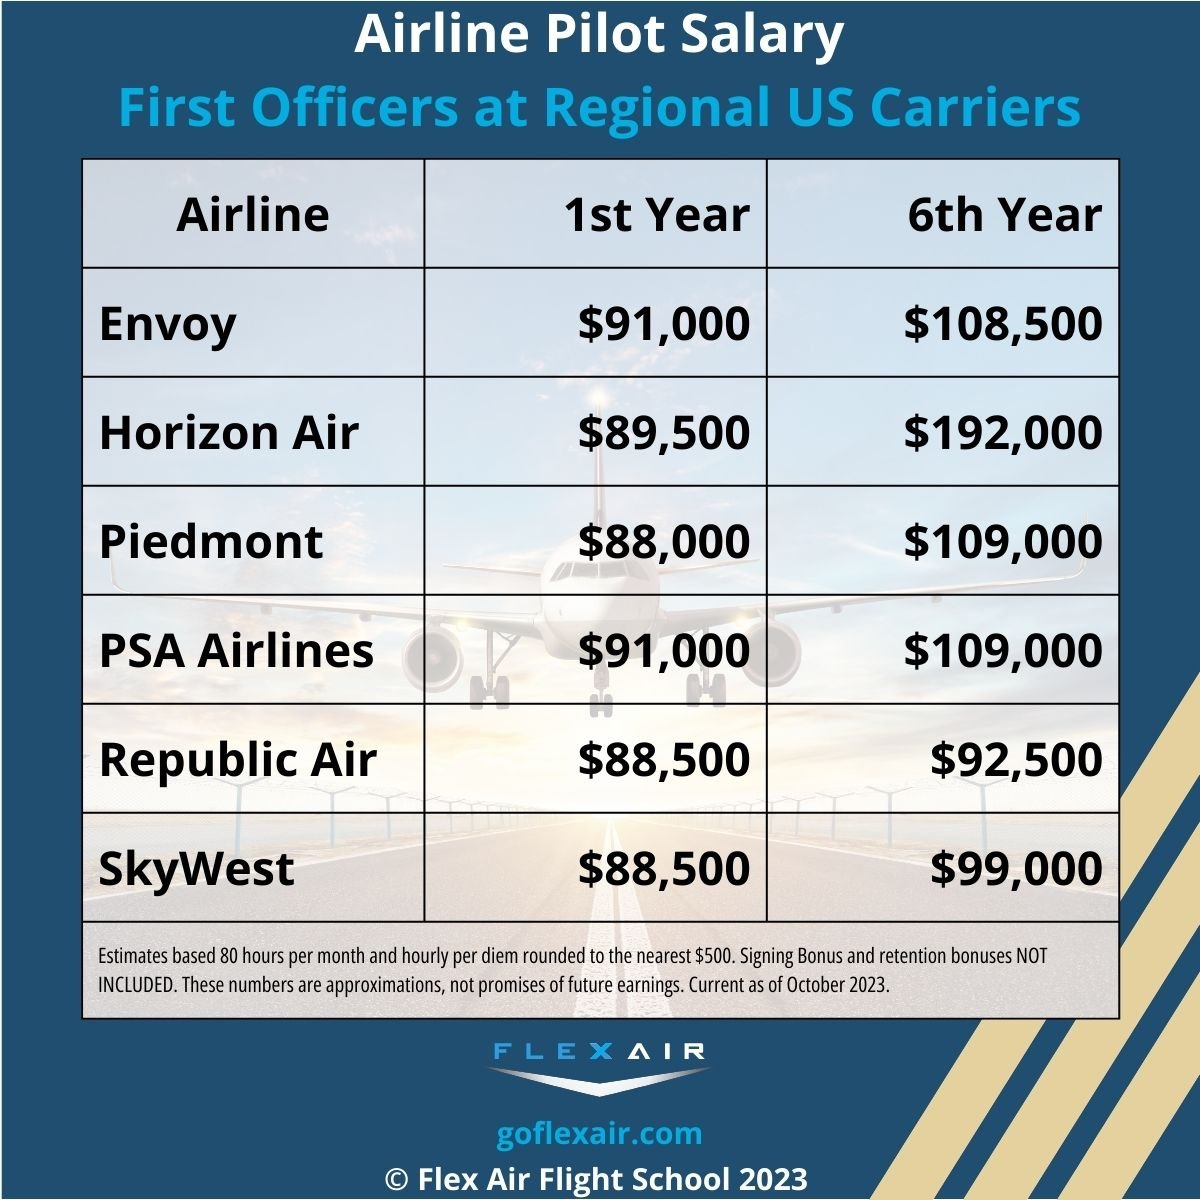 Airline Pilot Salary First Officers at Regional US Carriers